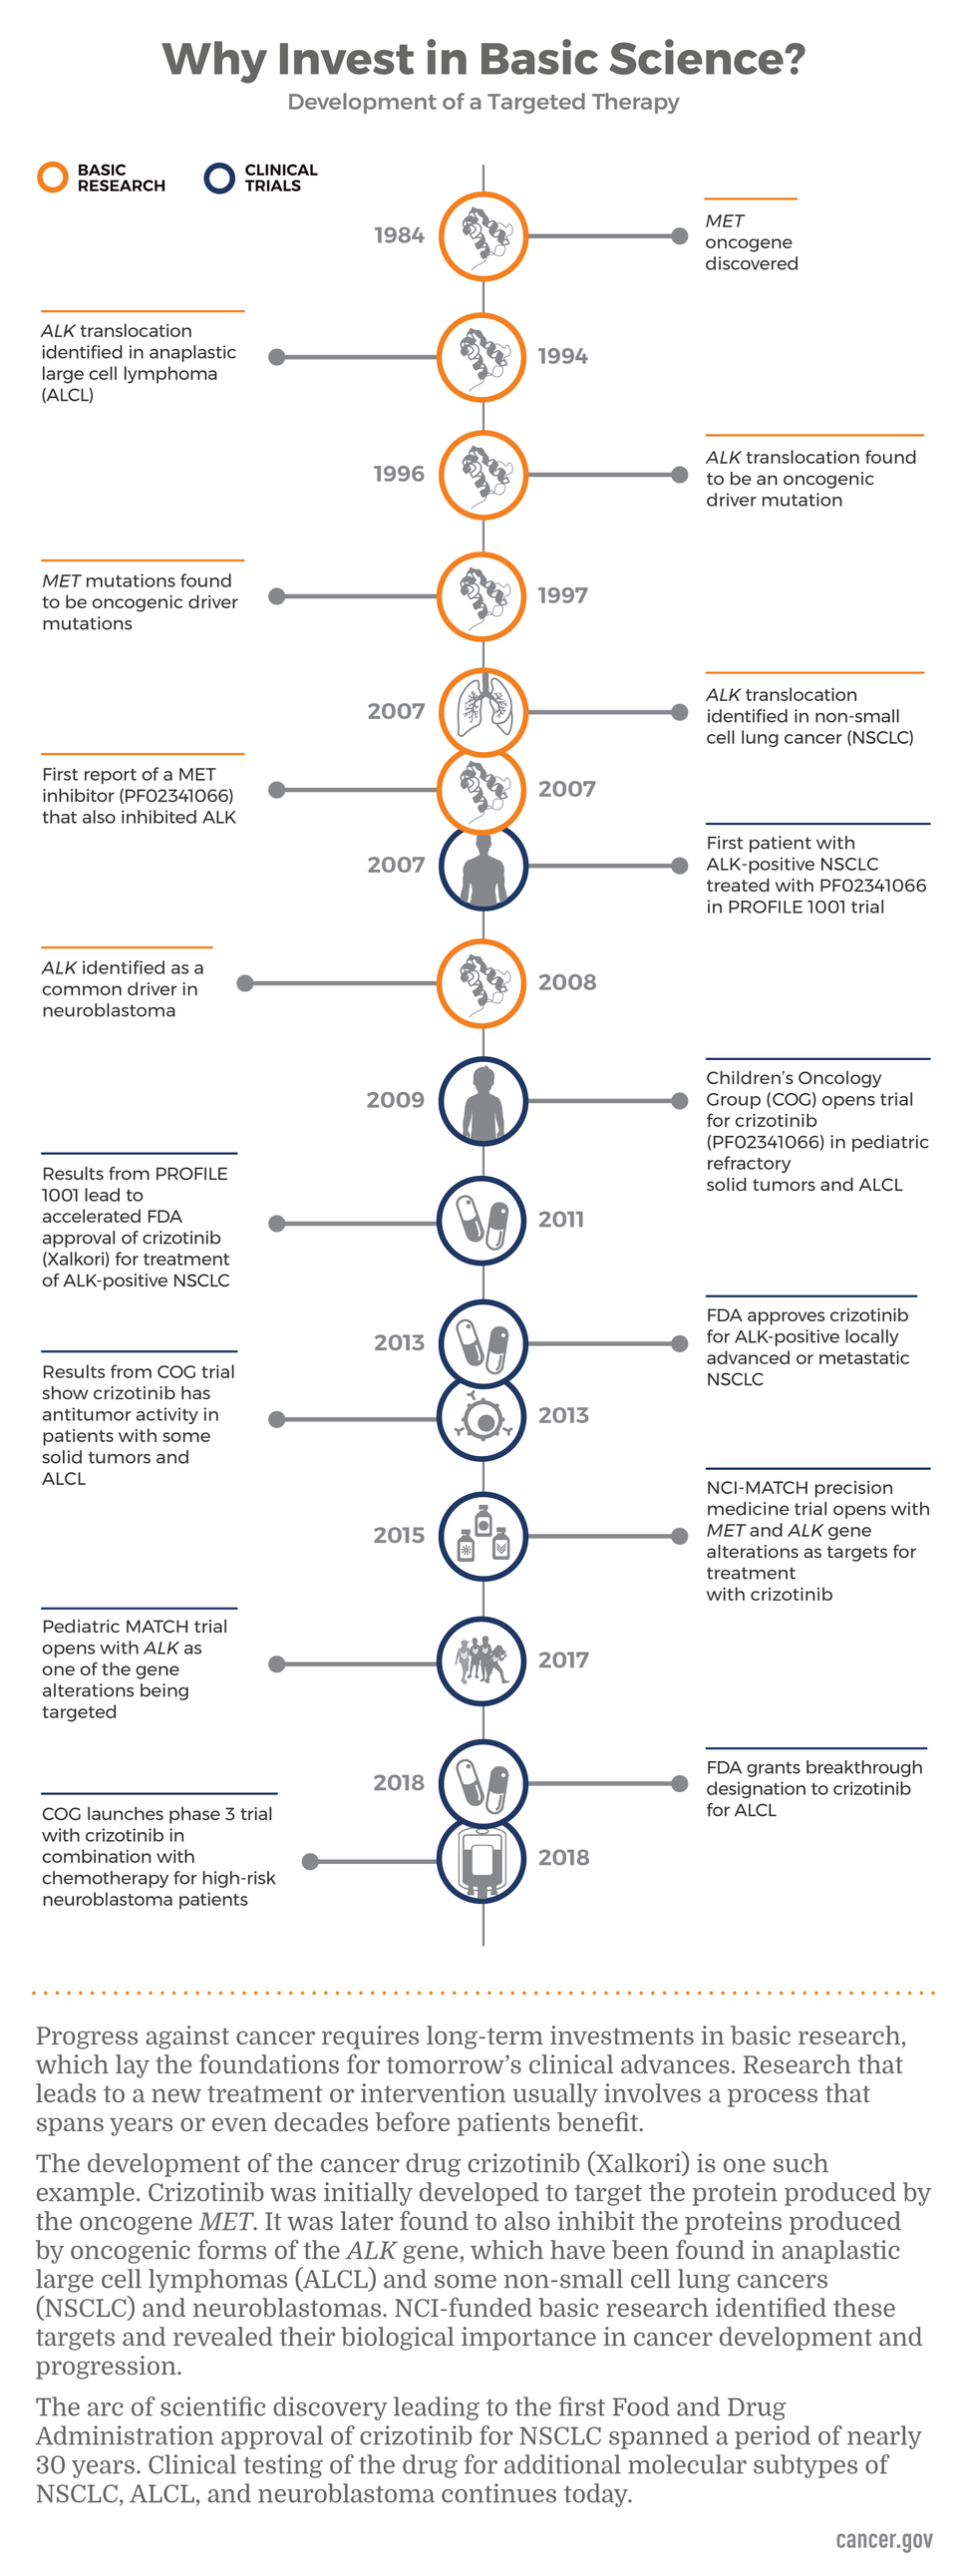 Why we should invest in basic Science? It lists the development of a targeted therapy. Infographic shows the basic research steps and clinical trials to develop cancer drug crizotinib. Shows steps from 1984 when MET oncogene was discovered; 1997 when MET mutations found to be oncogenic driver mutations; 2007 when first report of a MET inhibitor and first patient treated; 2009 when Childrens’s Oncology Group (COG) opens trial for crizotinib; 2013 FDA approves crizotinib; through 2018 when FDA grants breakthr